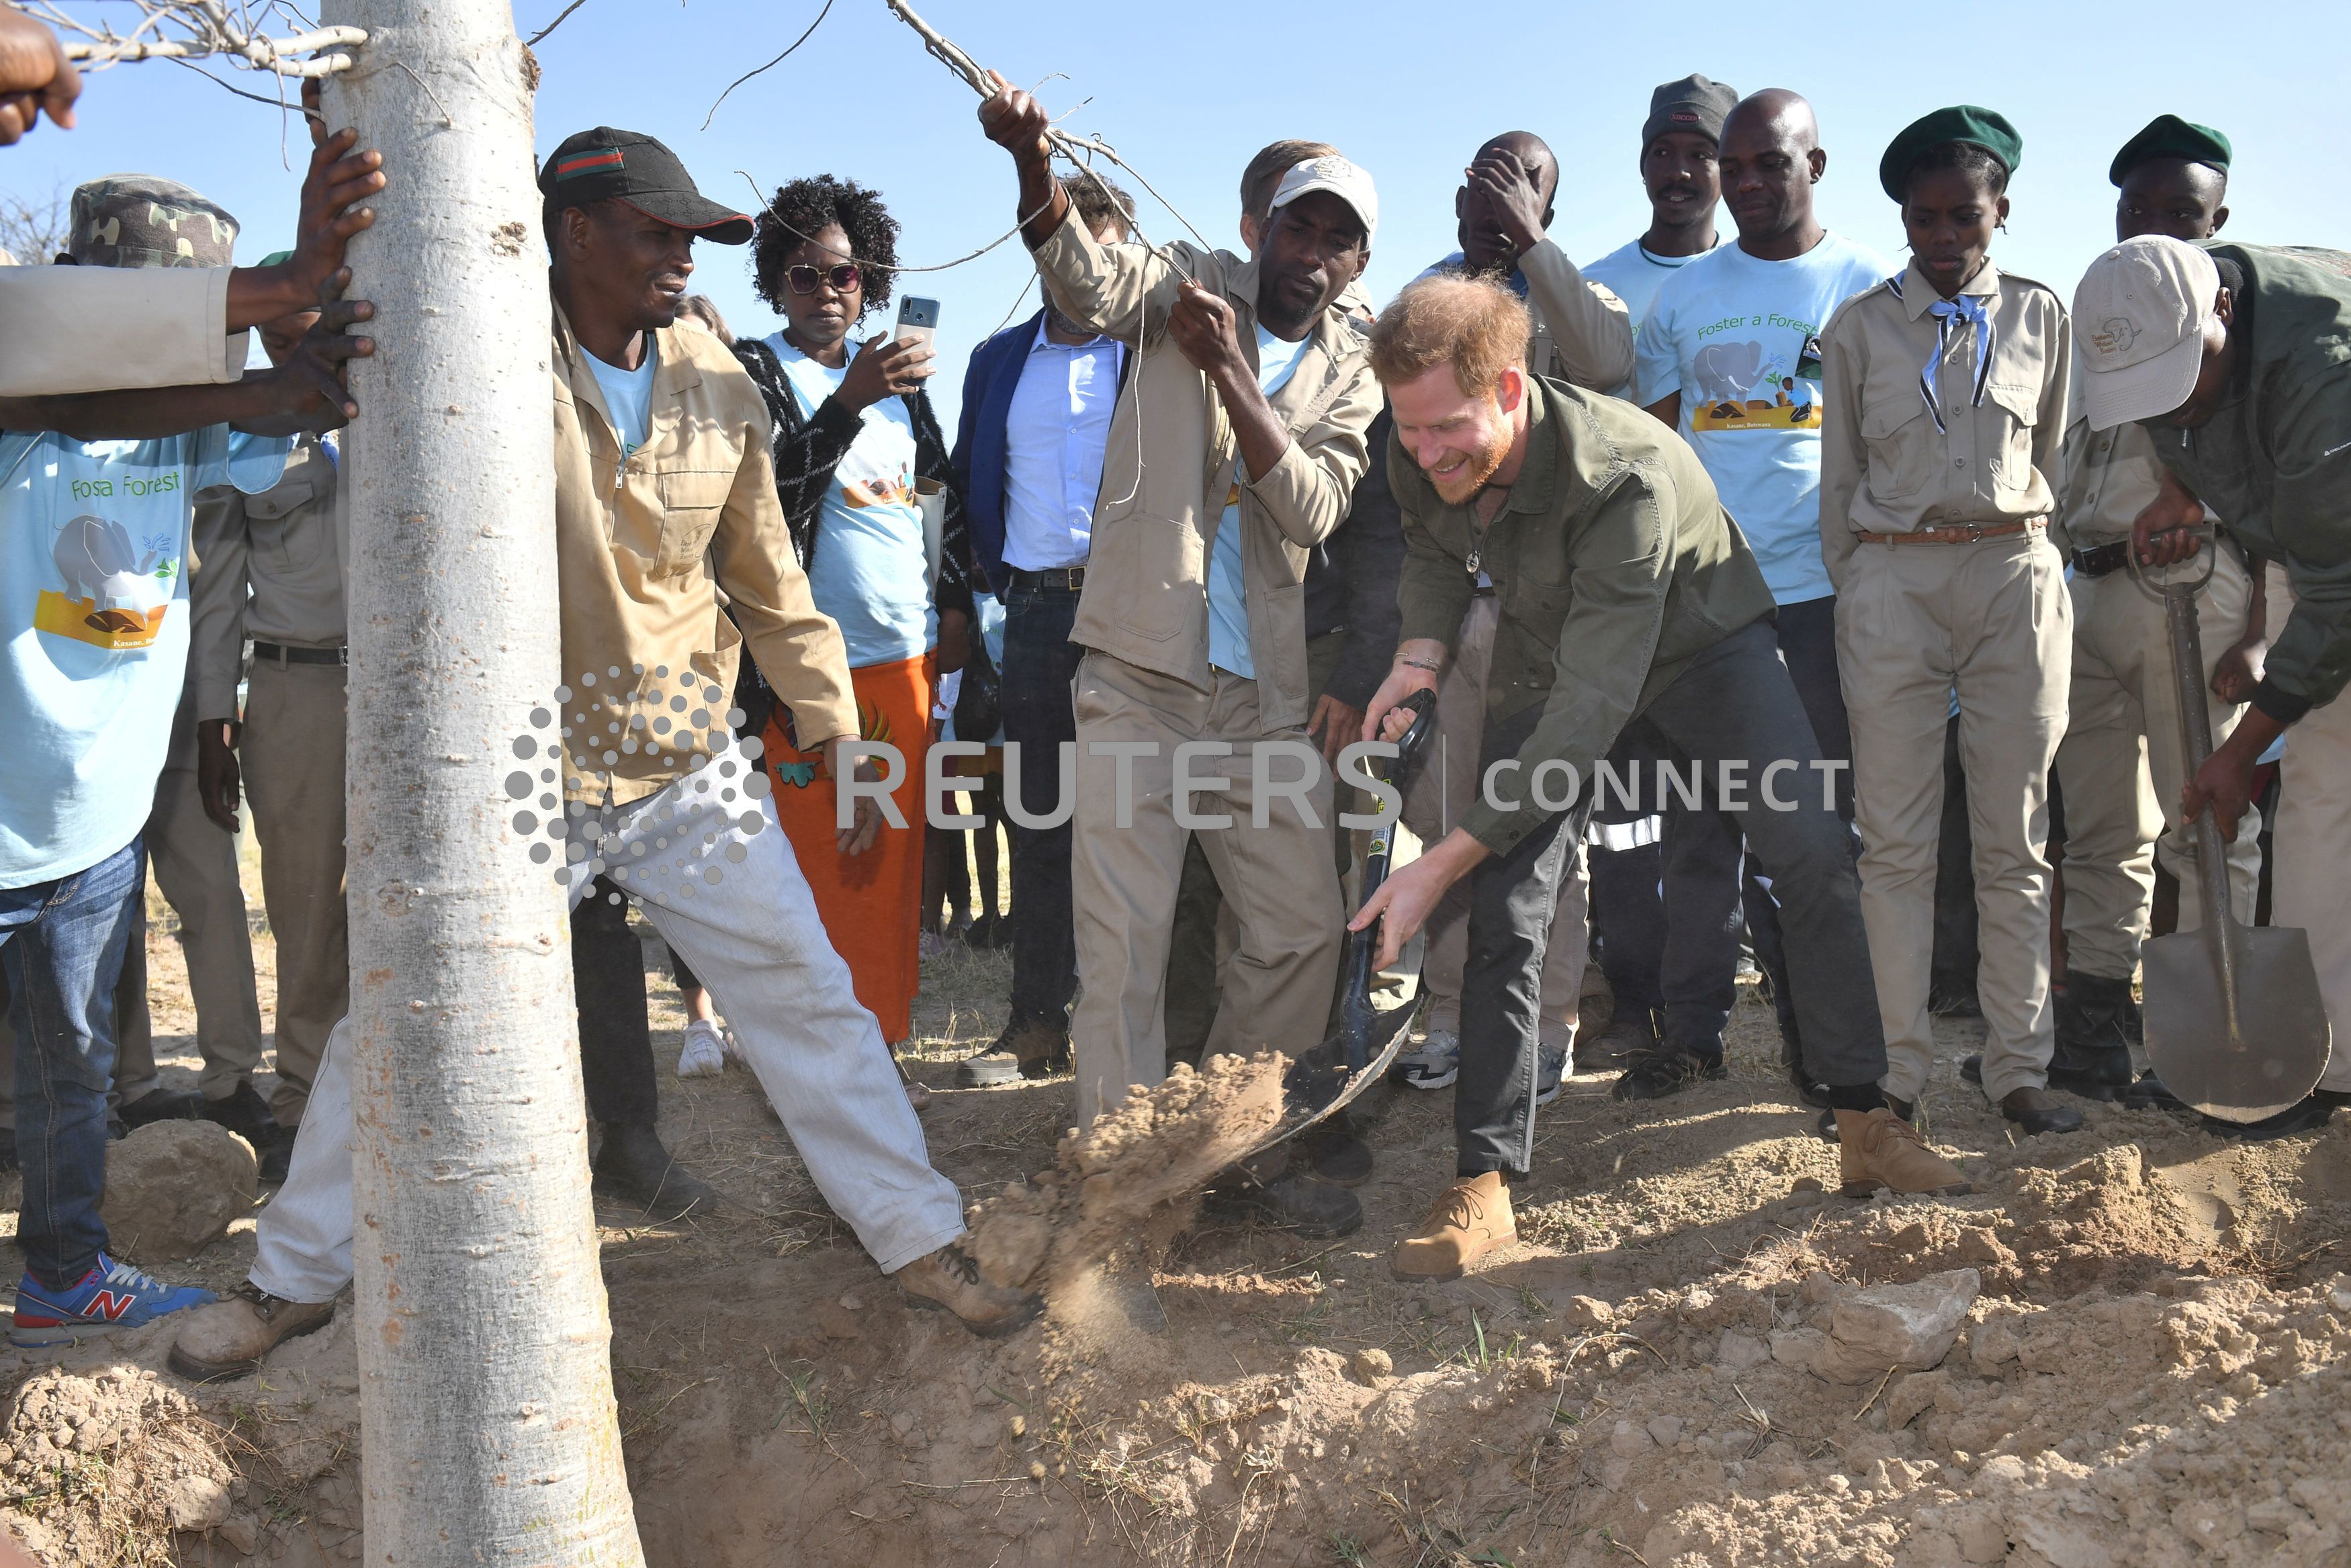 2019-09-26T073446Z_1801994430_RC197385DBE0_RTRMADP_3_BRITAIN-ROYALS-SAFRICA (1)